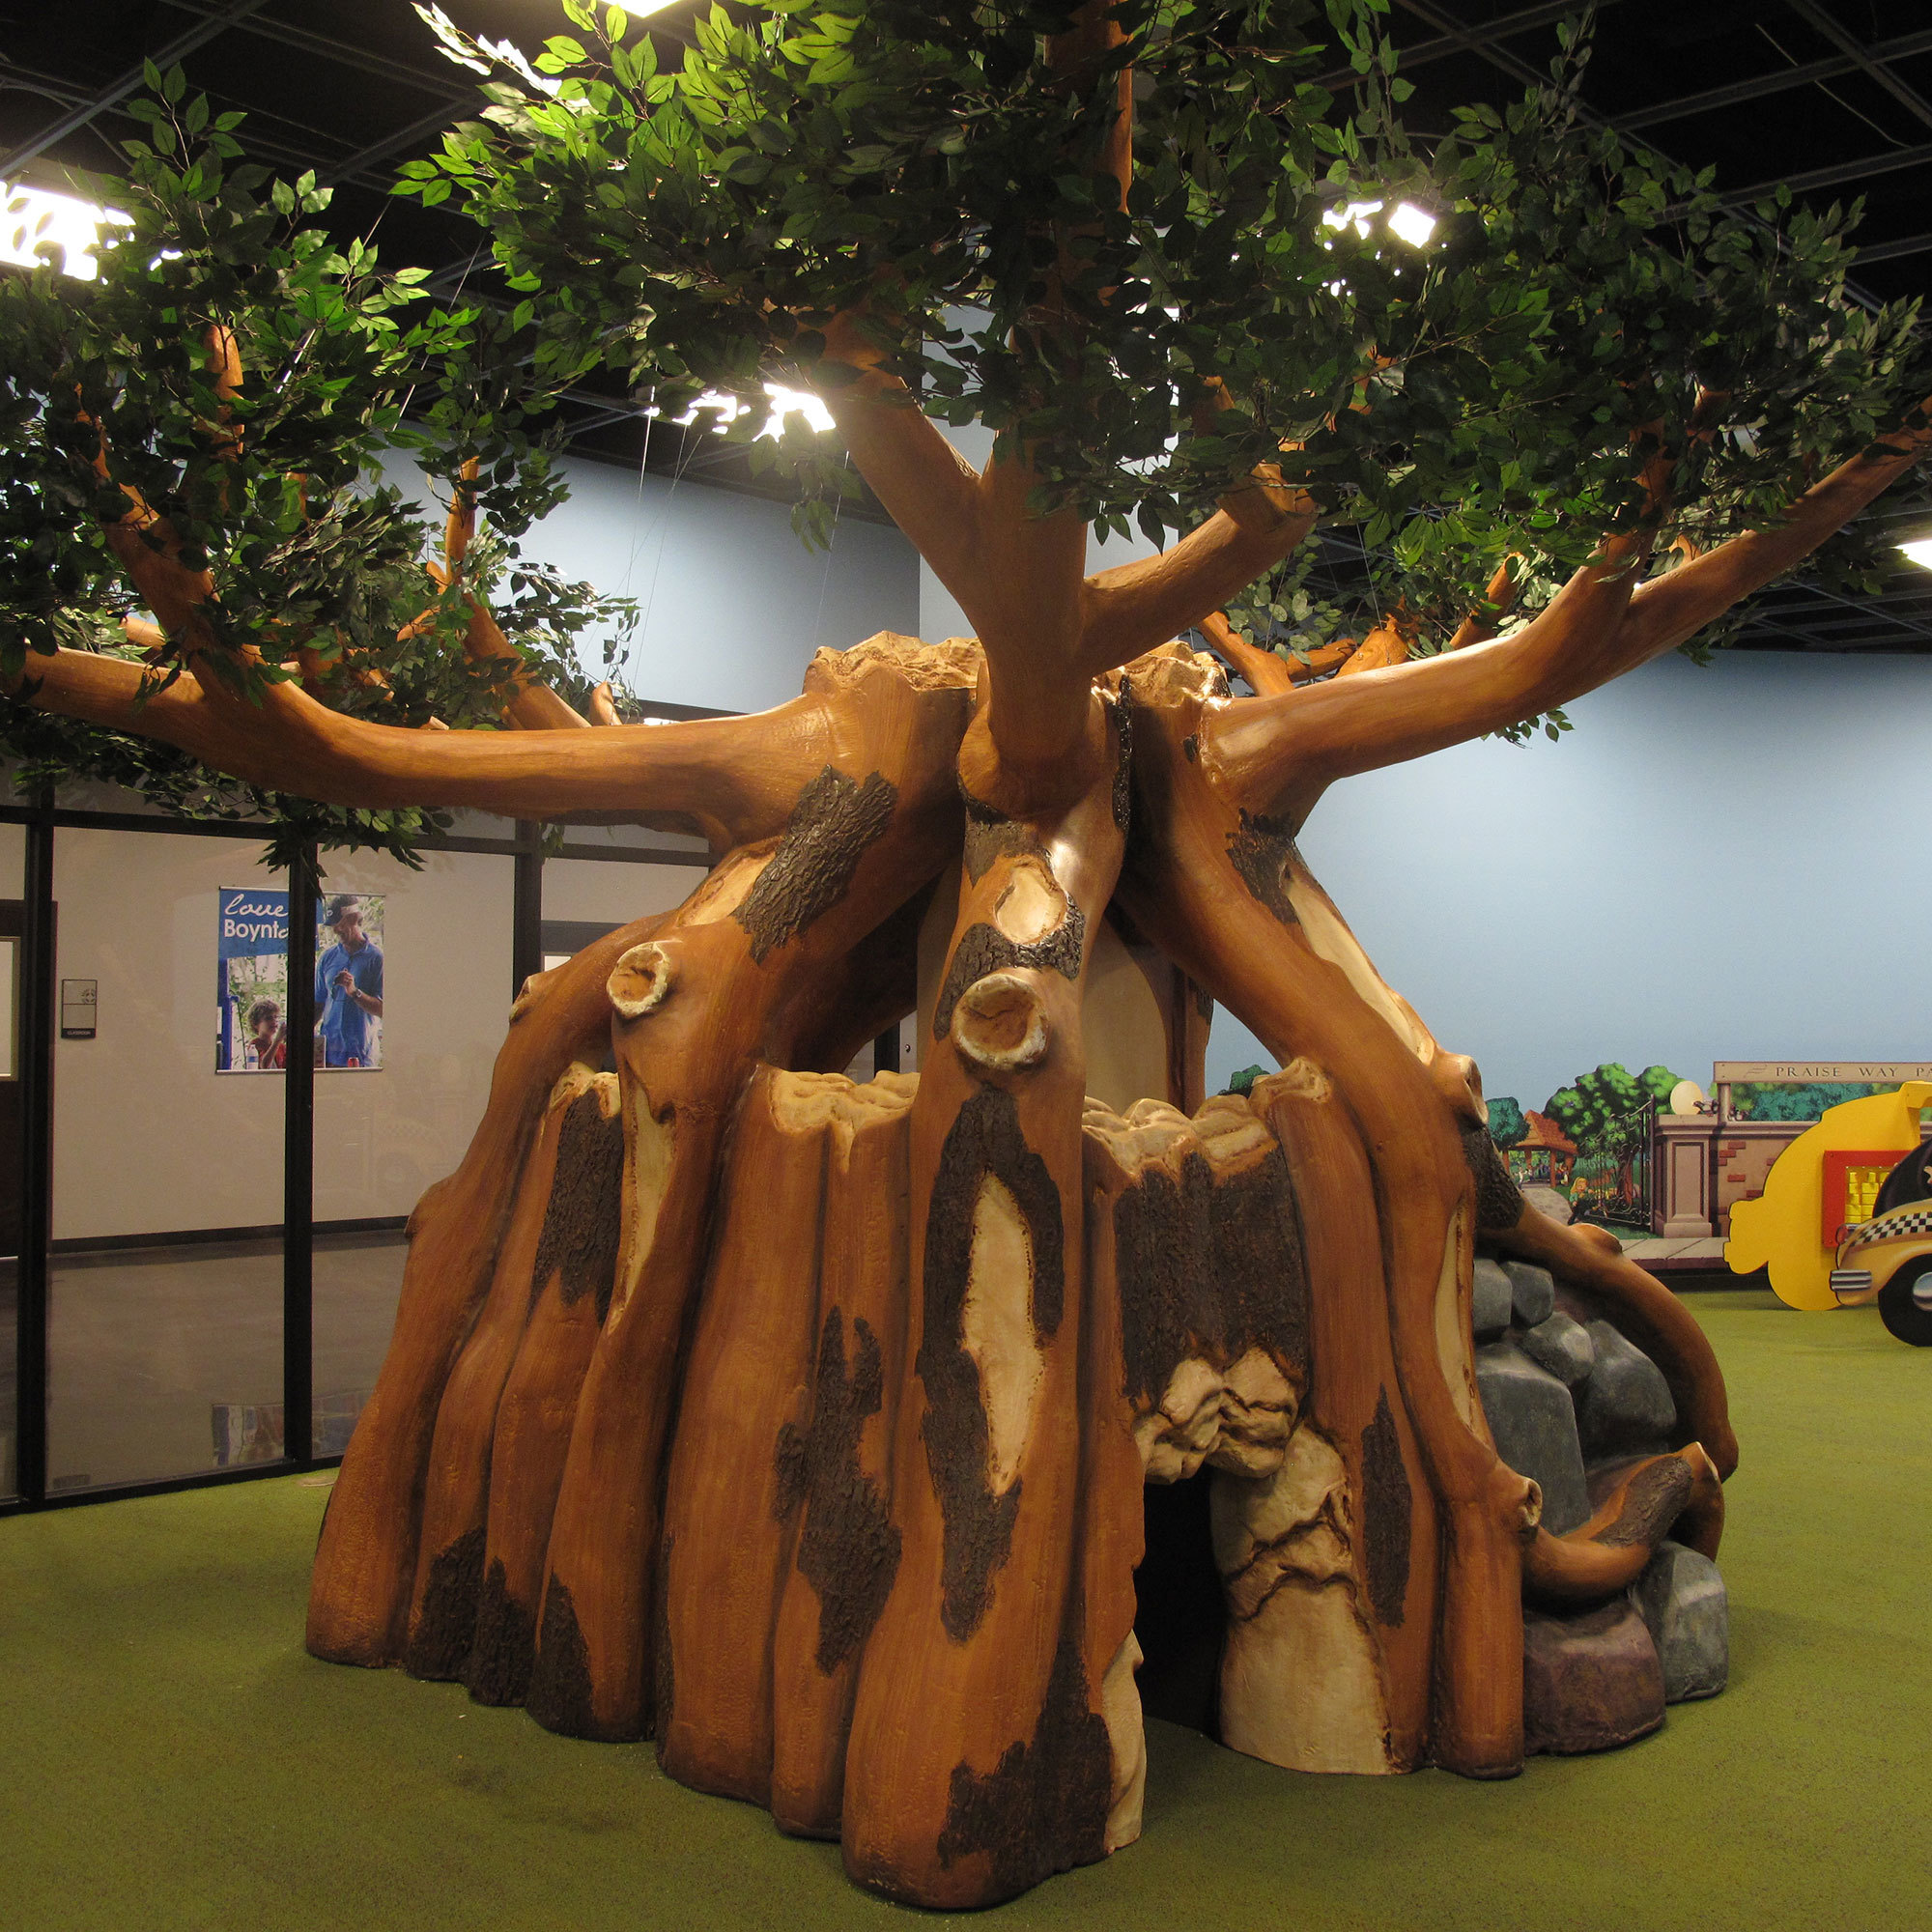 3D Sculpted Tree Play area with crawl throughs at Christ Fellowship Church